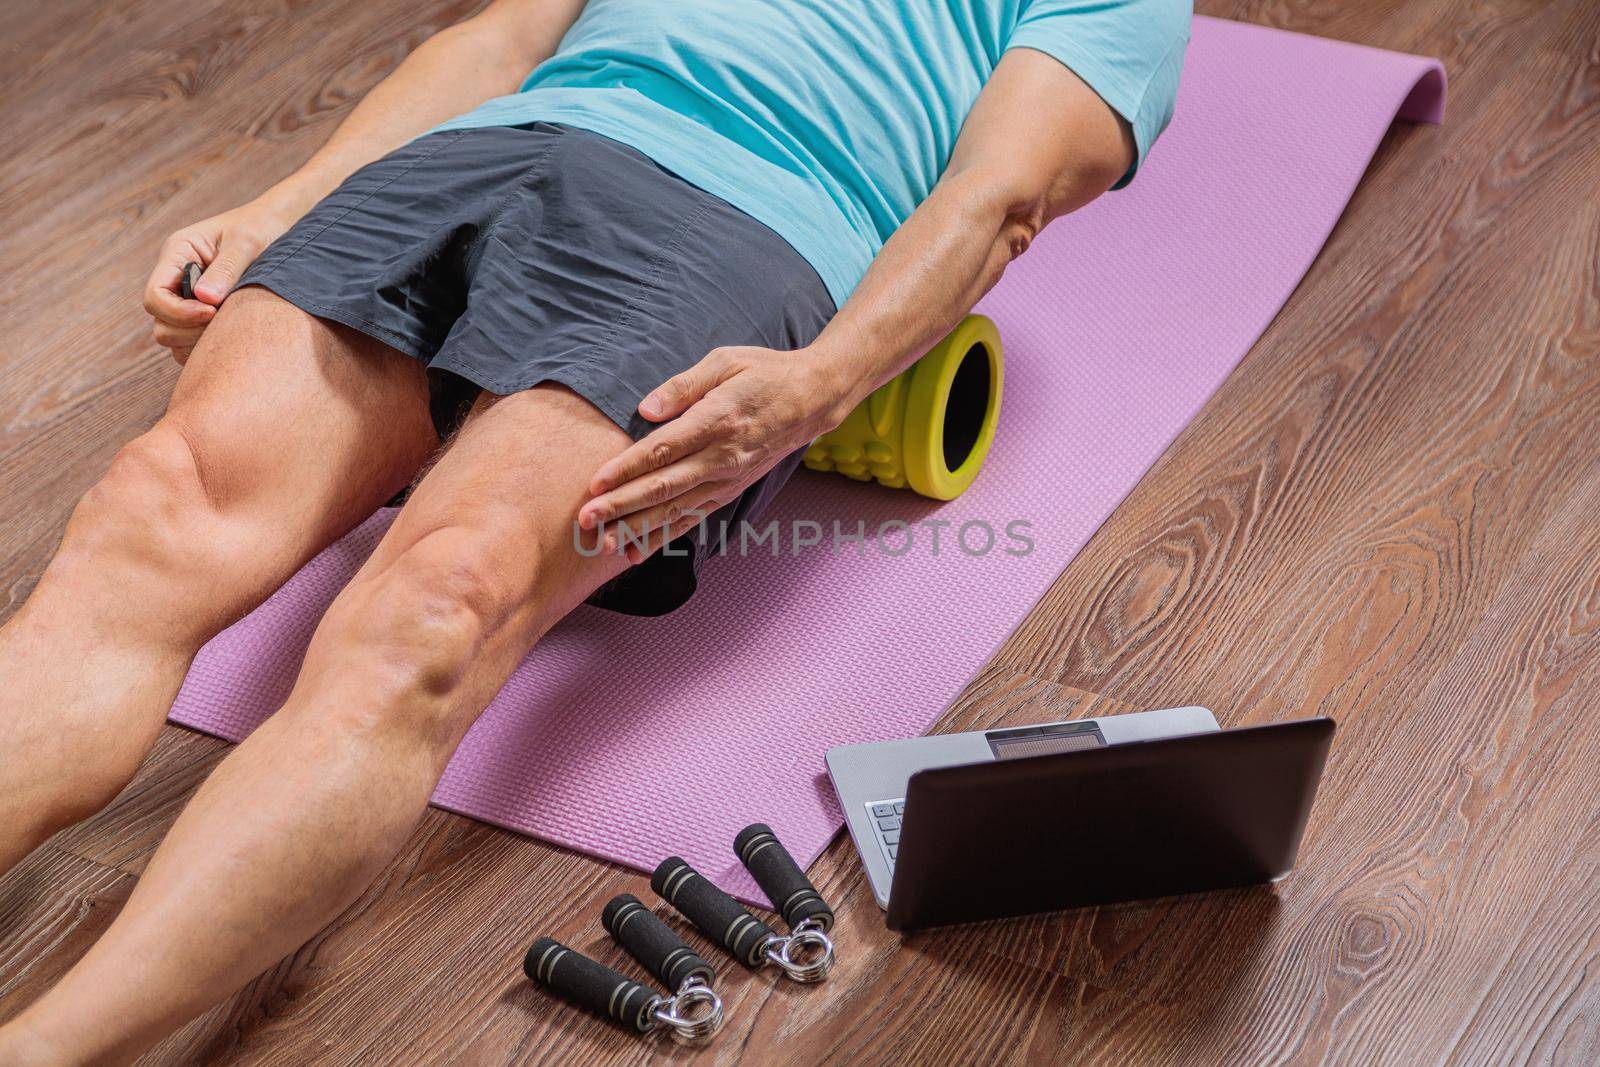 50 year old man performs exercises lying on mat at home looking at computer by Yurich32